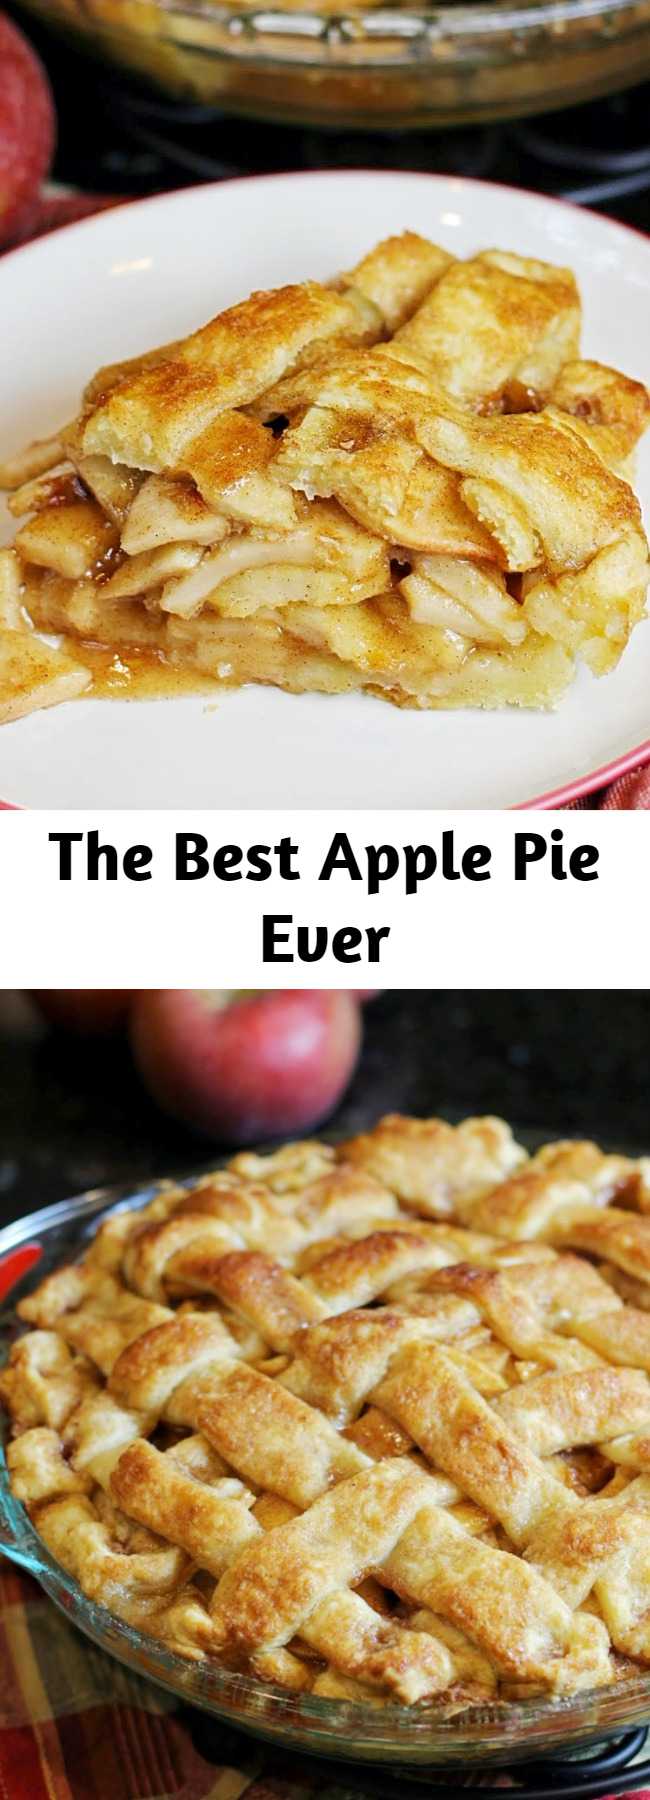 The Best Apple Pie Ever - So, what makes this apple pie so special? Let’s take a look at some key ingredients. The type of apple you use does make a difference. I use granny smith, but I’ve successfully made it with other varieties. As long as you choose a hard, tart apple, the end result will be delicious.